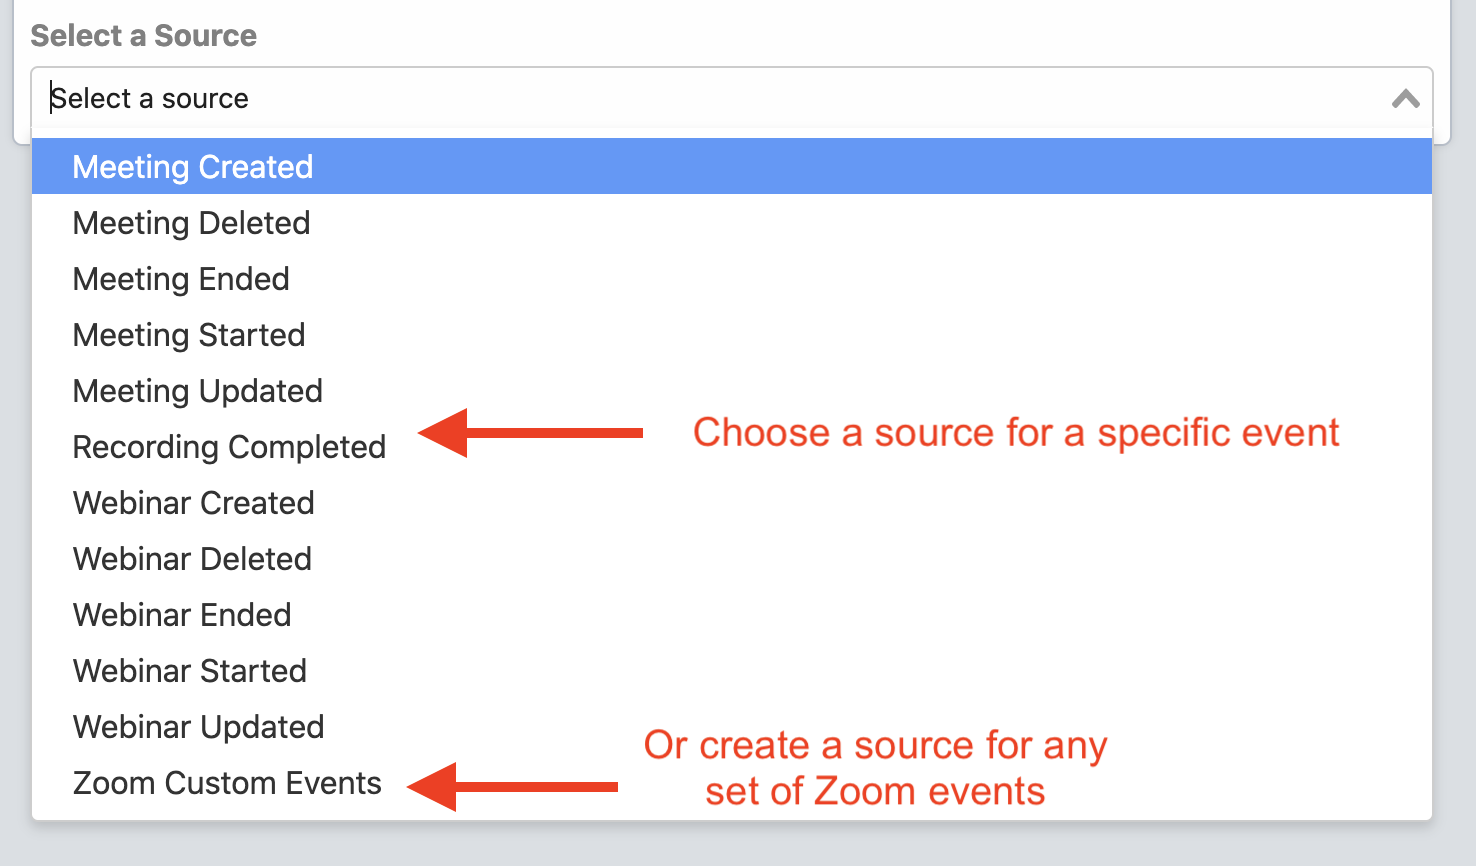 List of Zoom event sources